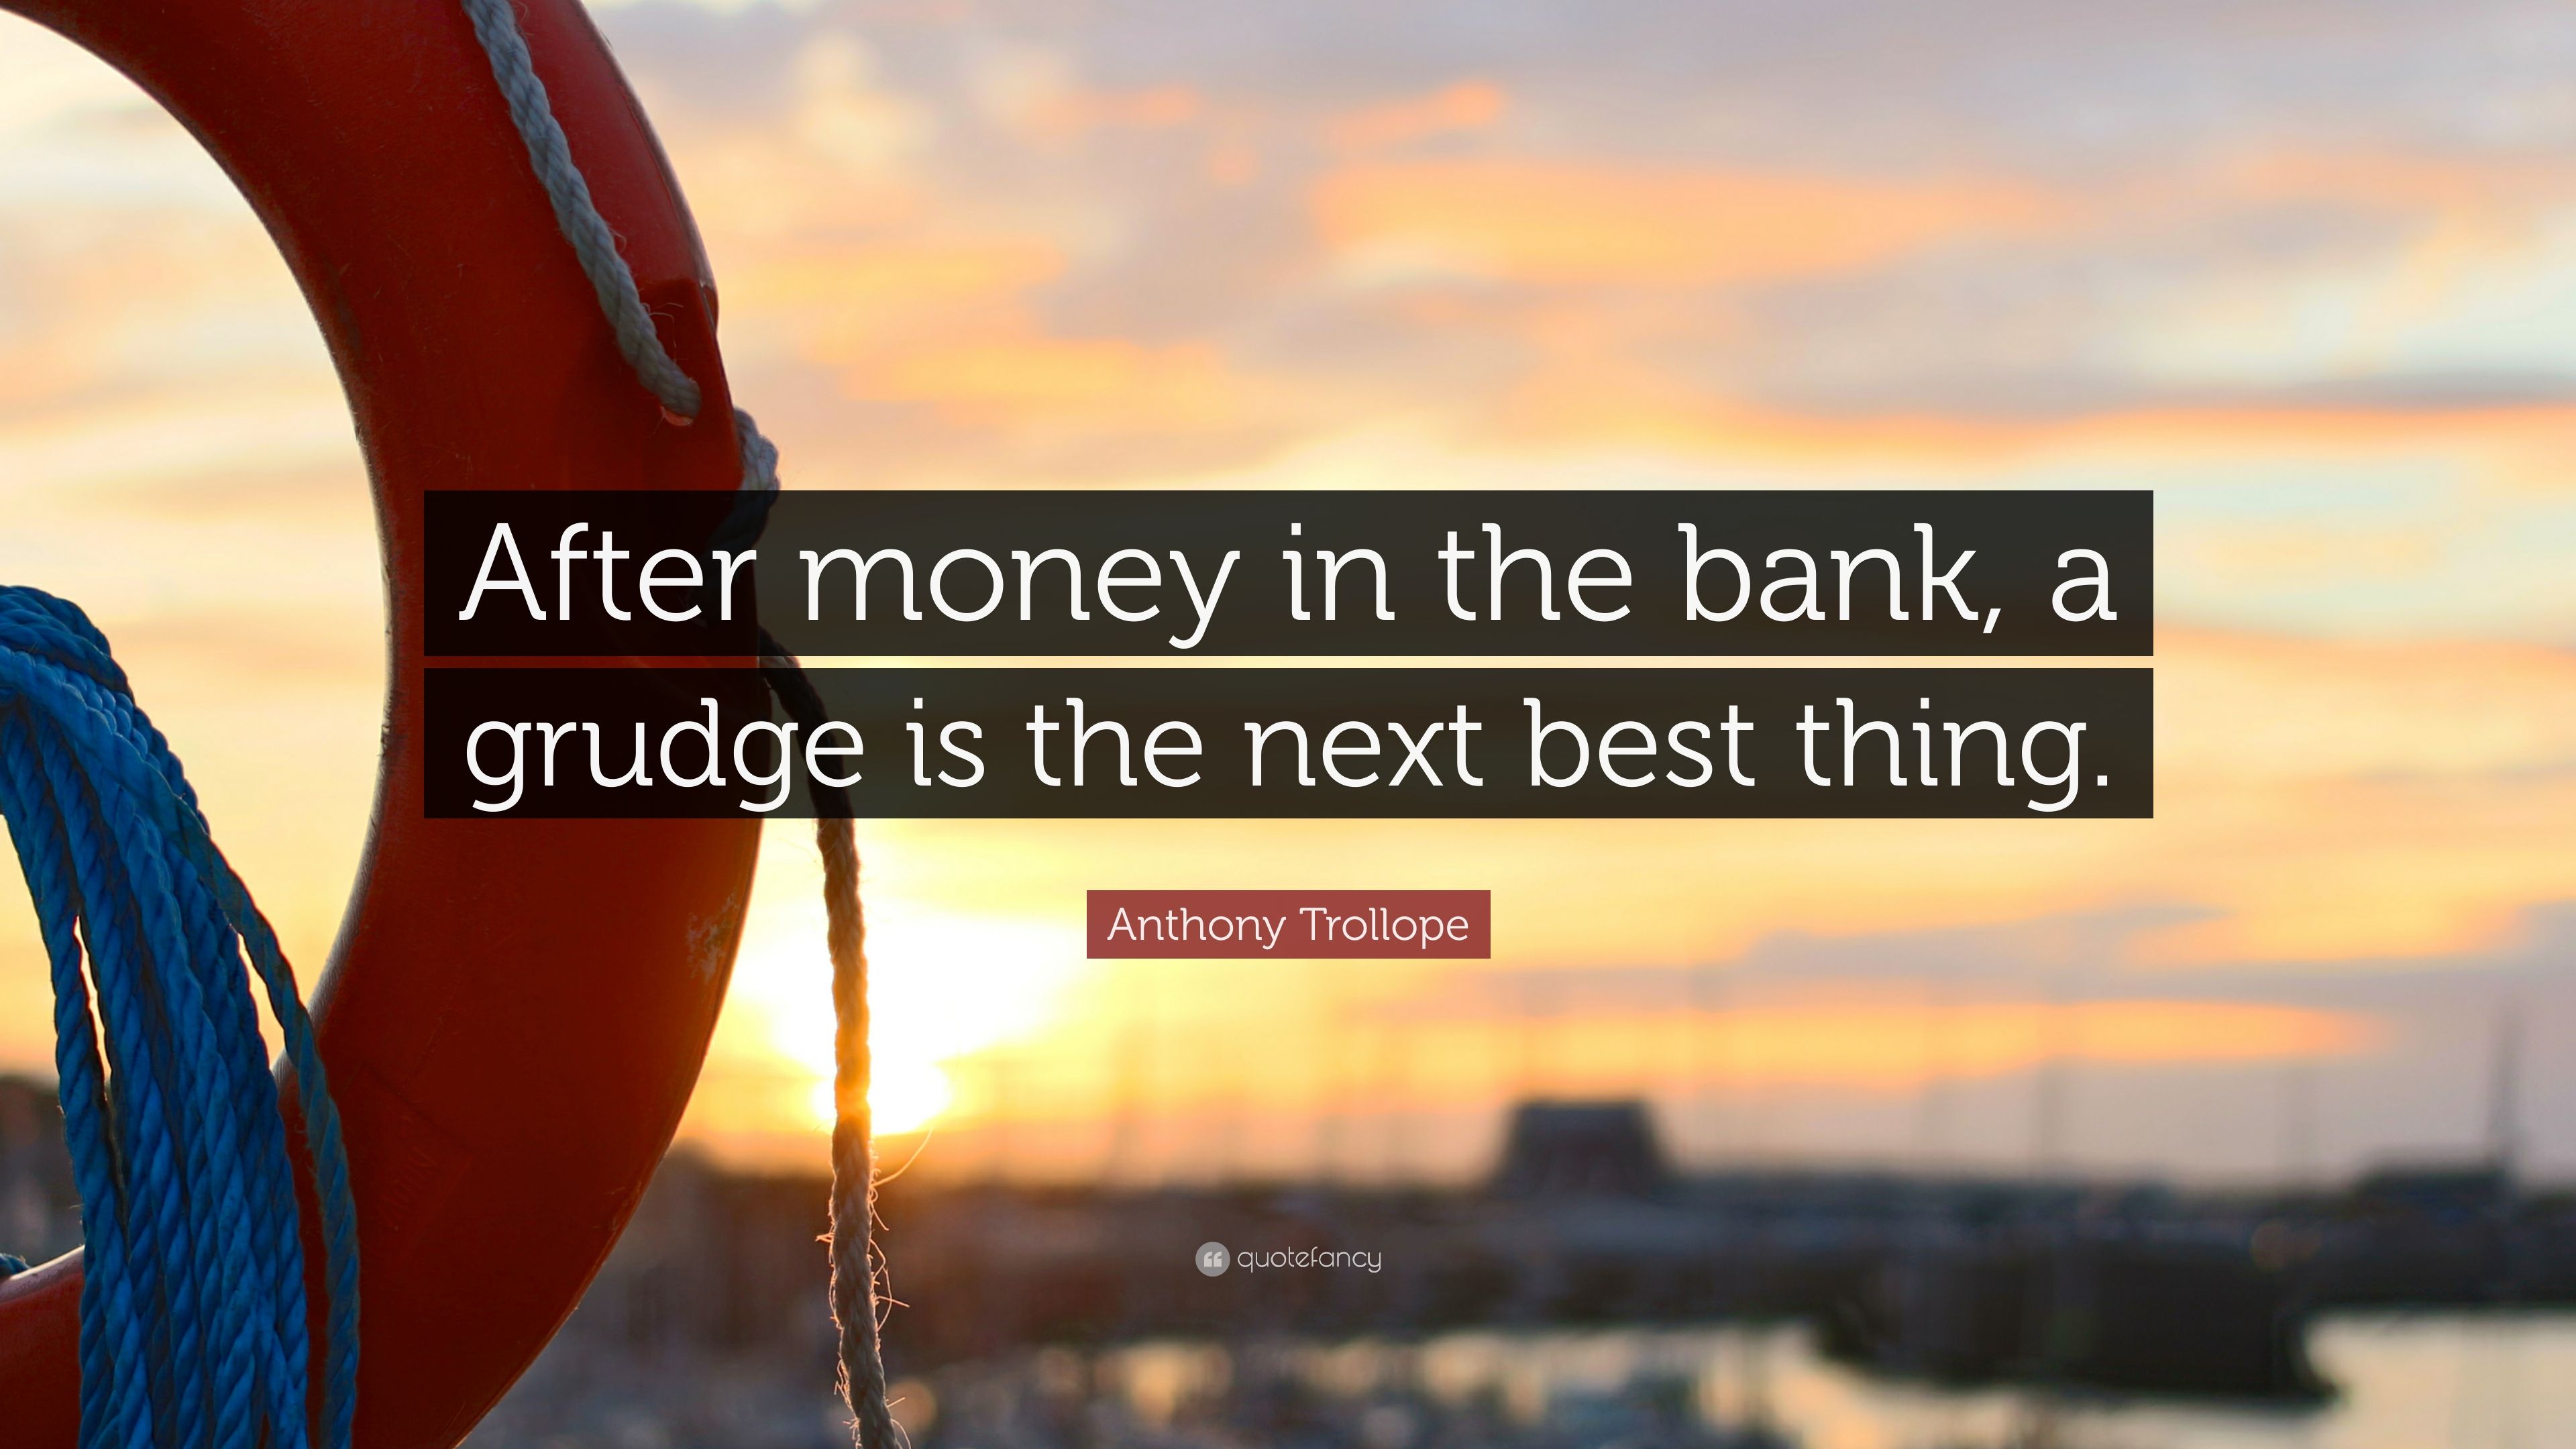 Anthony Trollope Quote - Warren Buffett Quotes Vessel , HD Wallpaper & Backgrounds